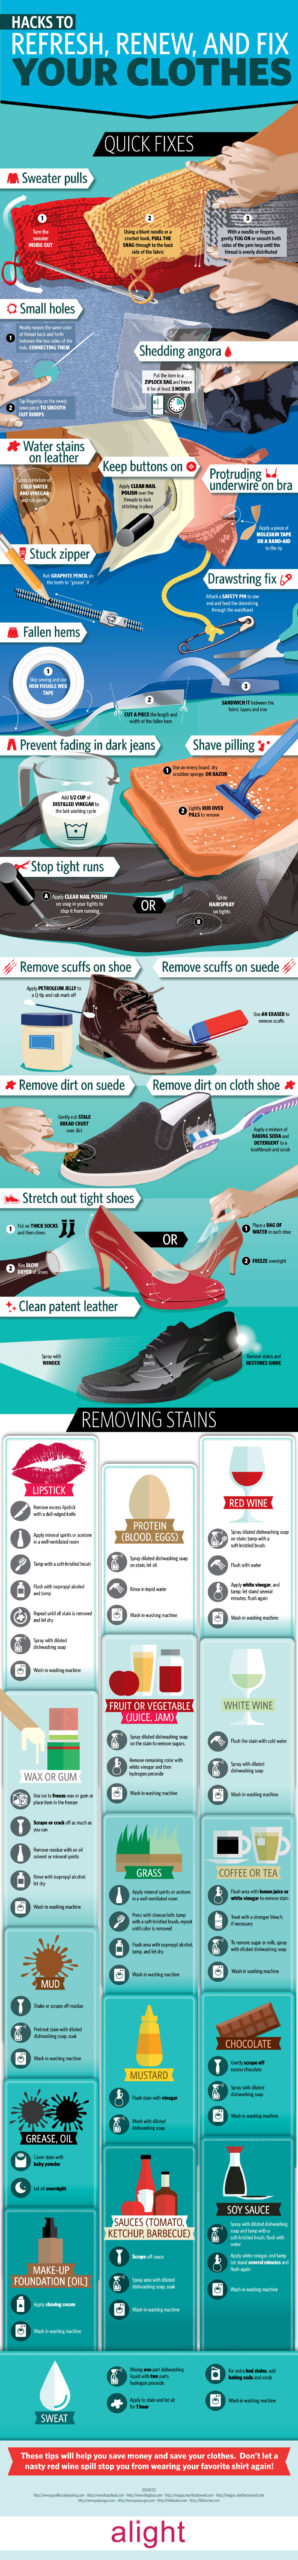 This Graphic Shows You How To Repair Common Clothing Problems